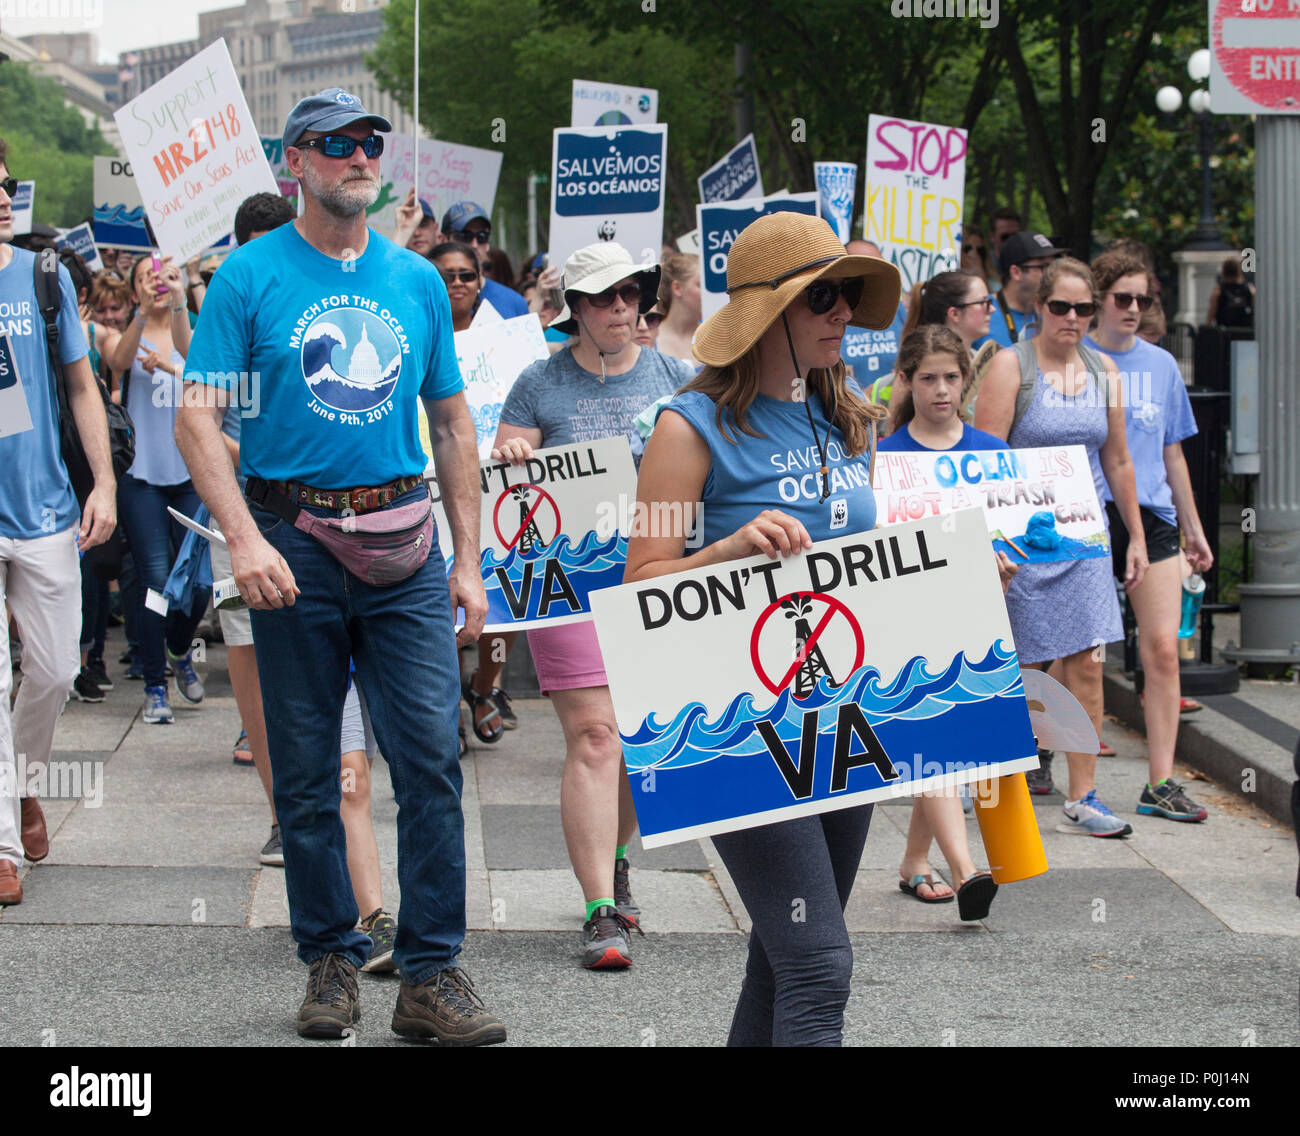 Washington DC, USA. 9th June 2018. Activists opposed to offshore drilling in Virginia on the March For The Ocean in Washington, D.C., June 9, 2018. The inaugural March for the Ocean called attention to ocean issues including plastic pollution and overfishing at events in the U.S. Capital and around the United States.. Credit: Robert Meyers/Alamy Live News Stock Photo